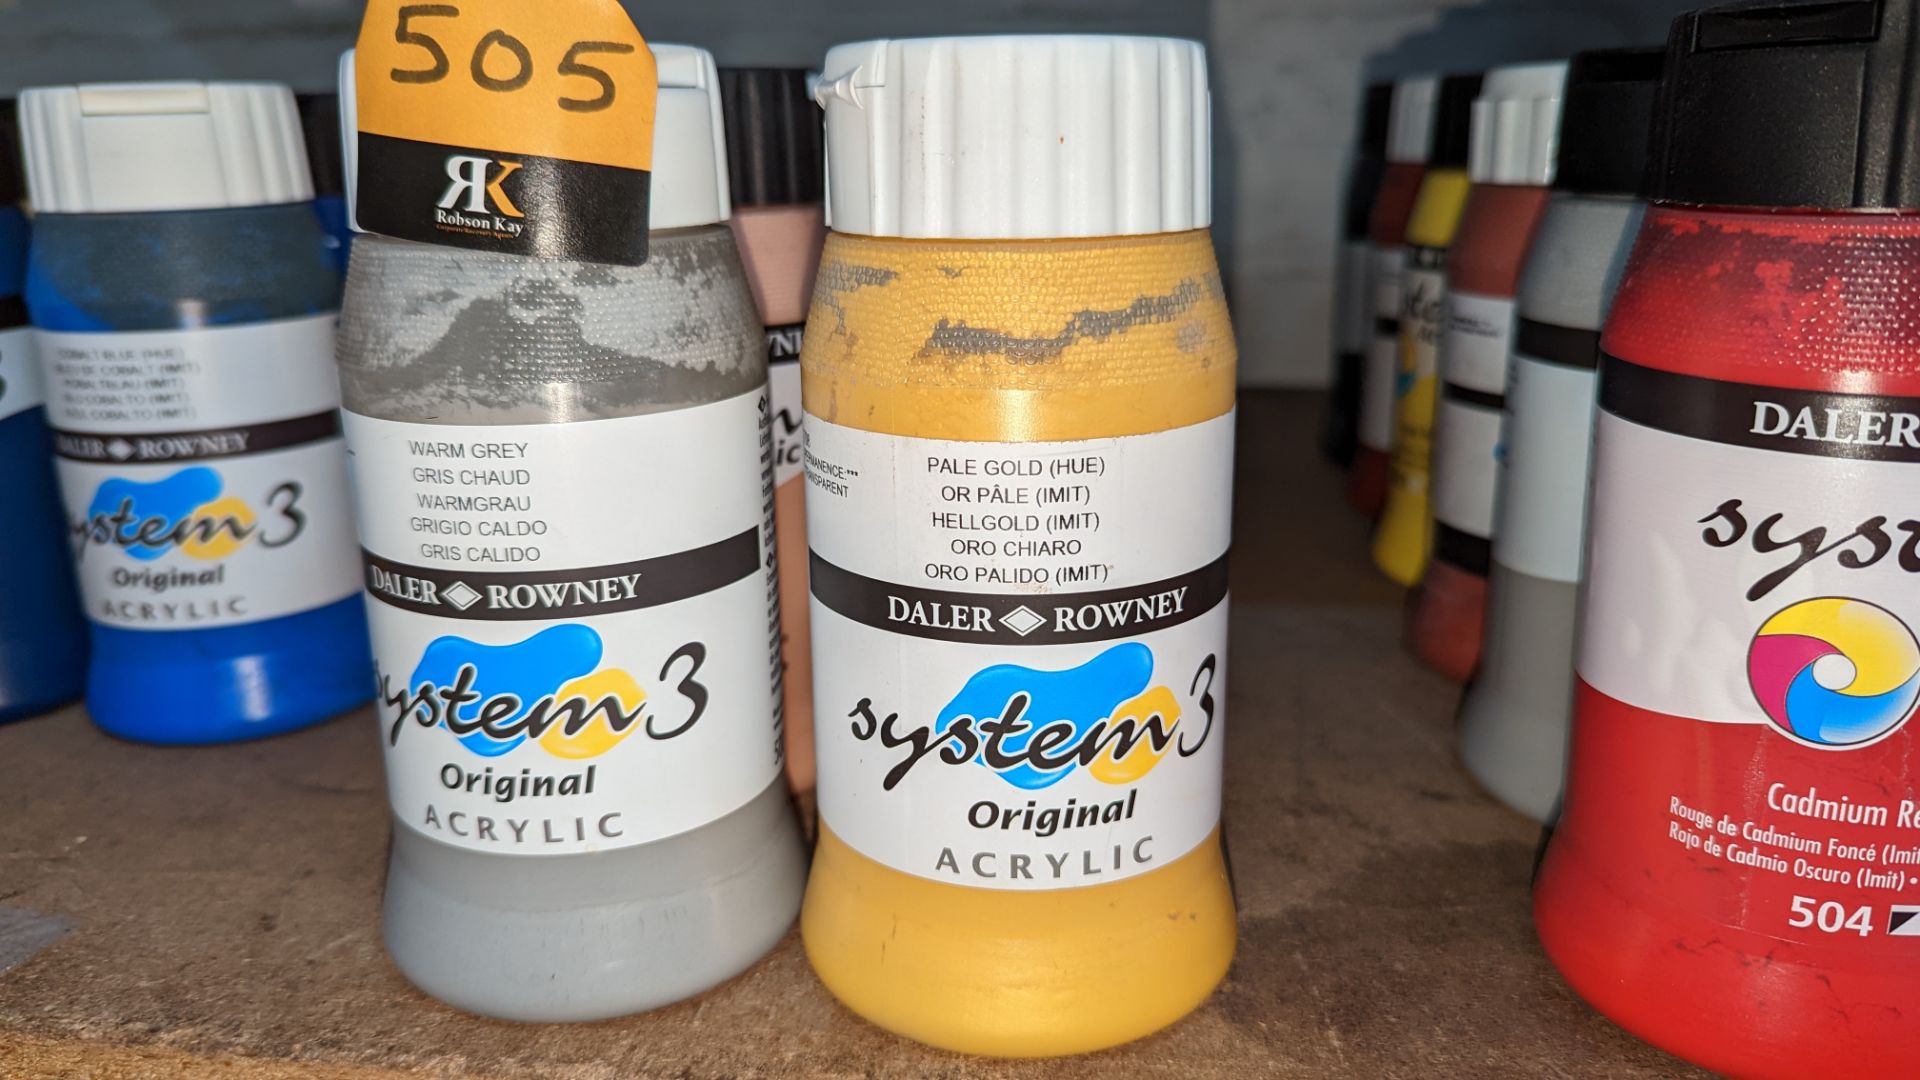 12 off 500ml tubs of Daler Rowney System 3 acrylic paint - Image 3 of 5